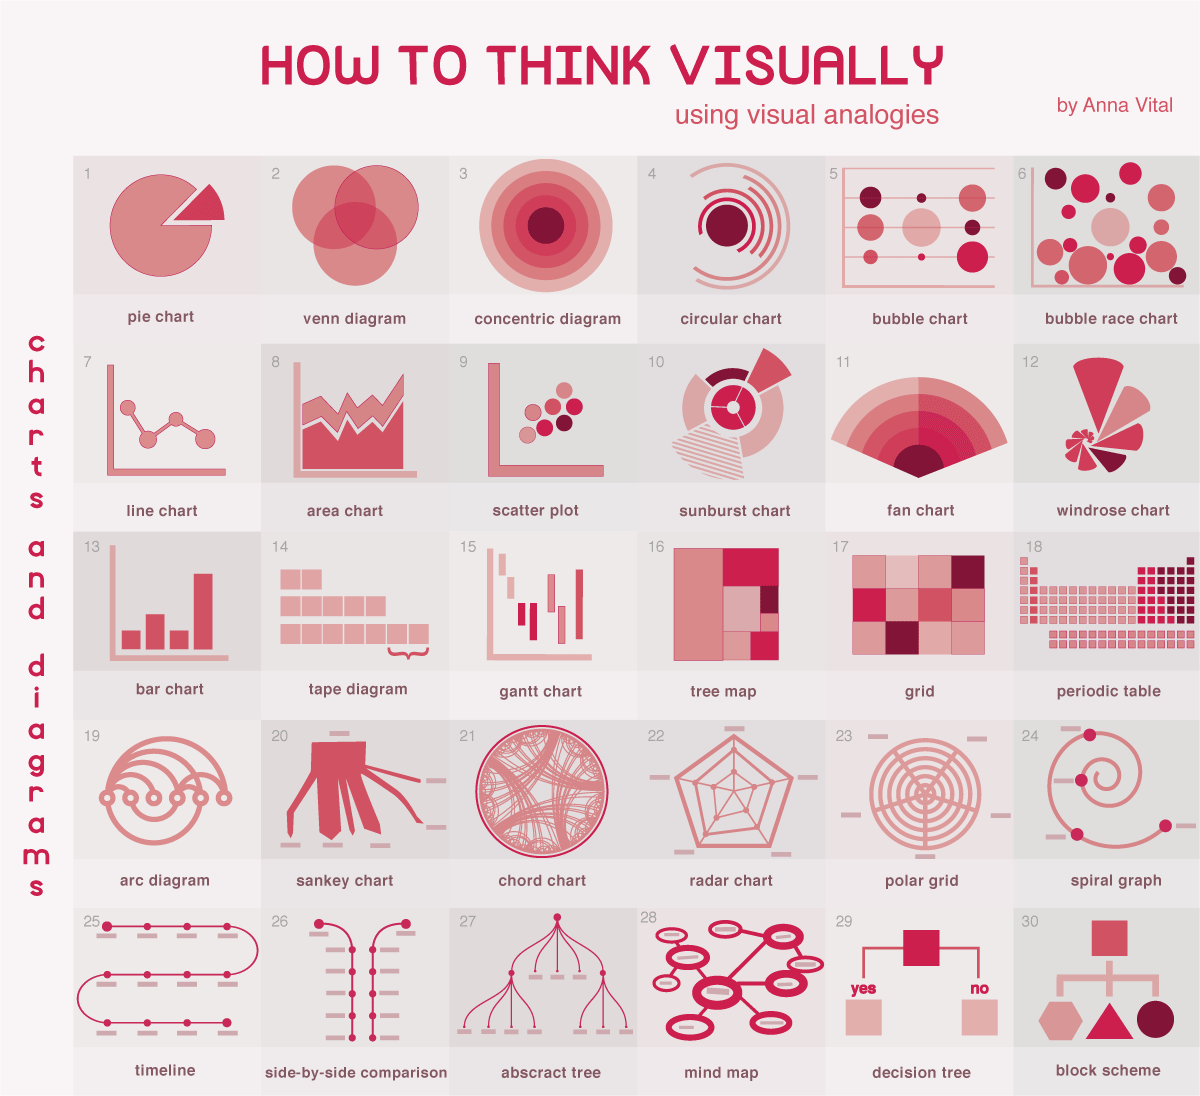 How to think visually using visual analogies - infographic